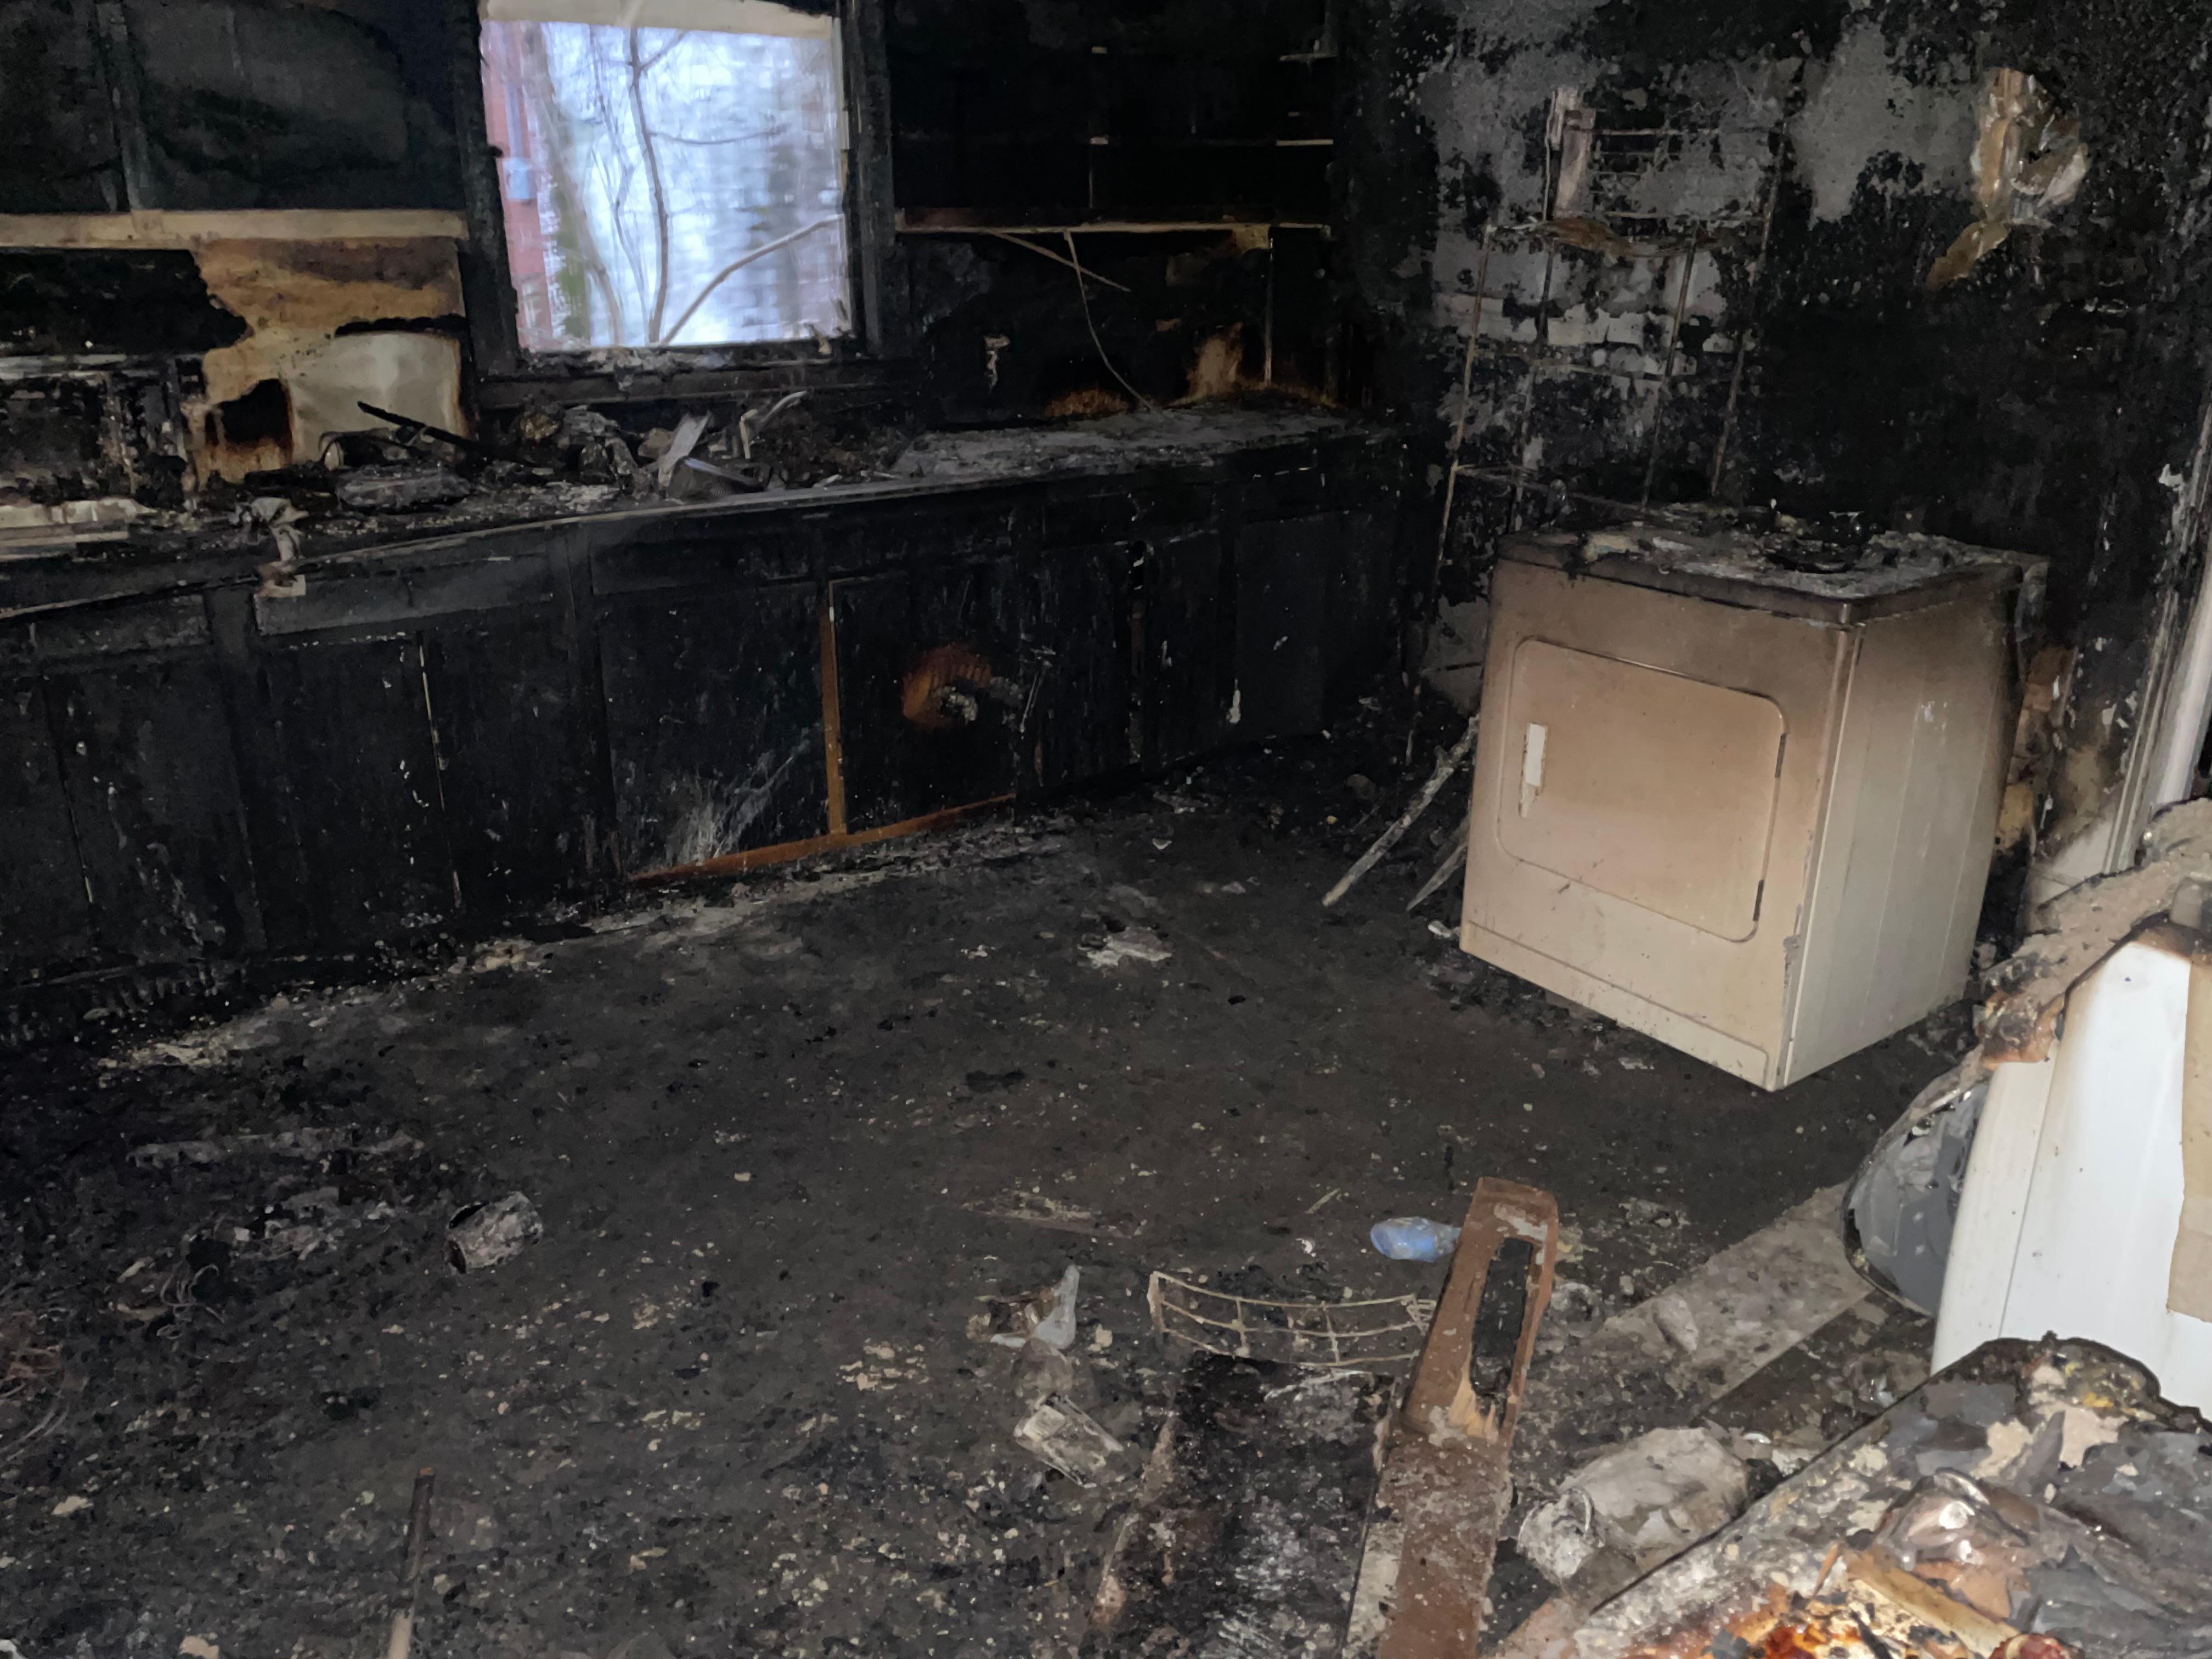 The muck and after effect of a fire loss can be devastating, we take inventory of salvaged and non-salvaged items to ensure your post loss conditions are the same as your home before the fire.